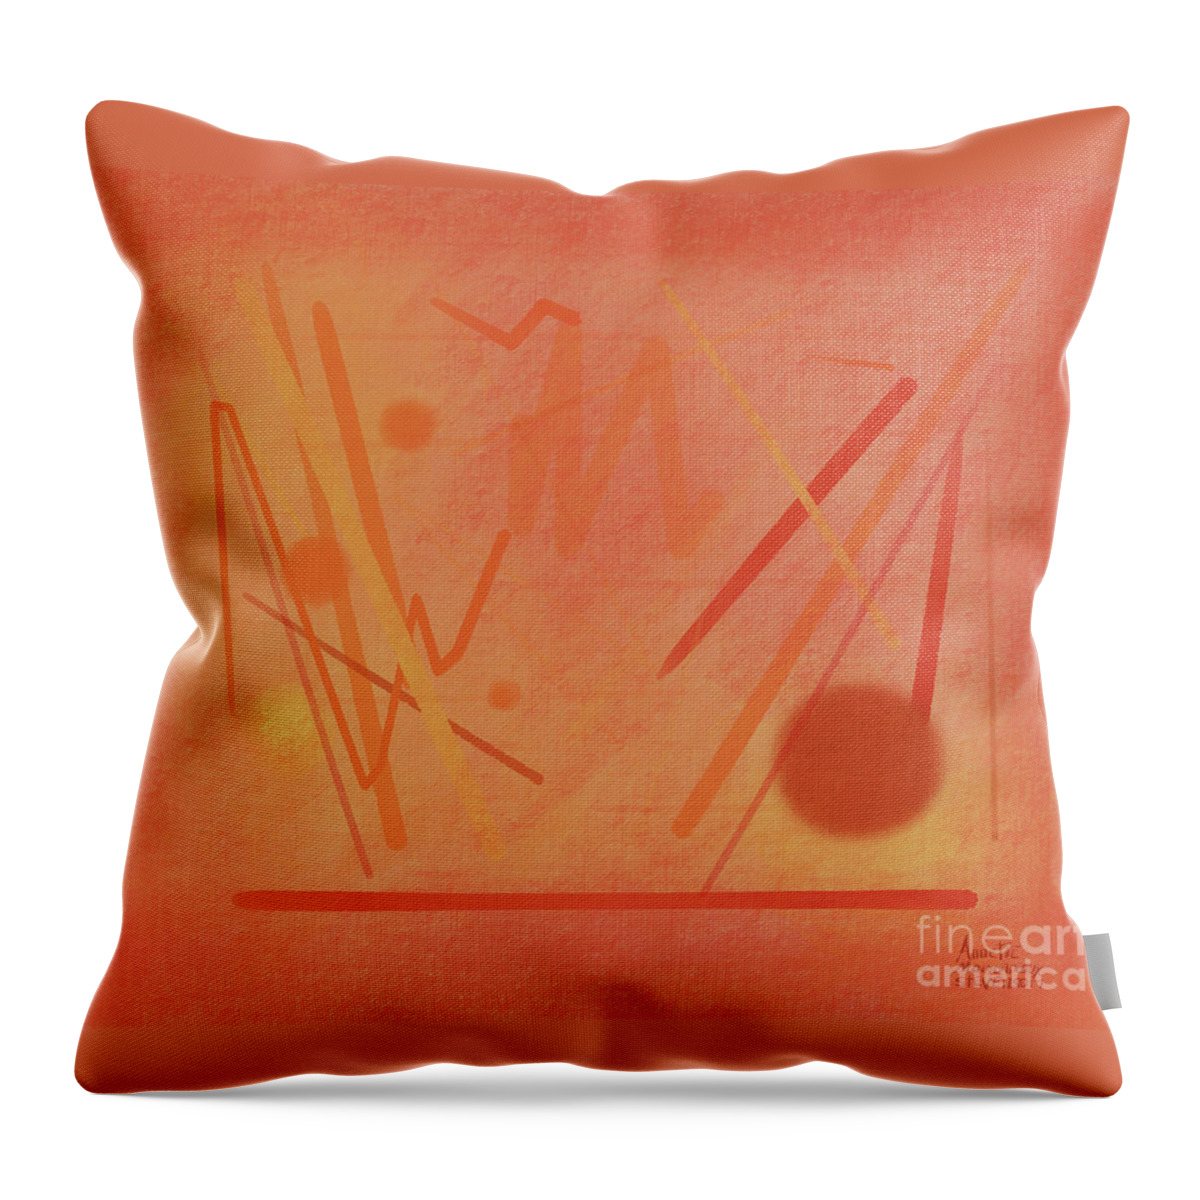 Playing In The Orchestra Throw Pillow featuring the digital art Playing in the Orchestra by Annette M Stevenson